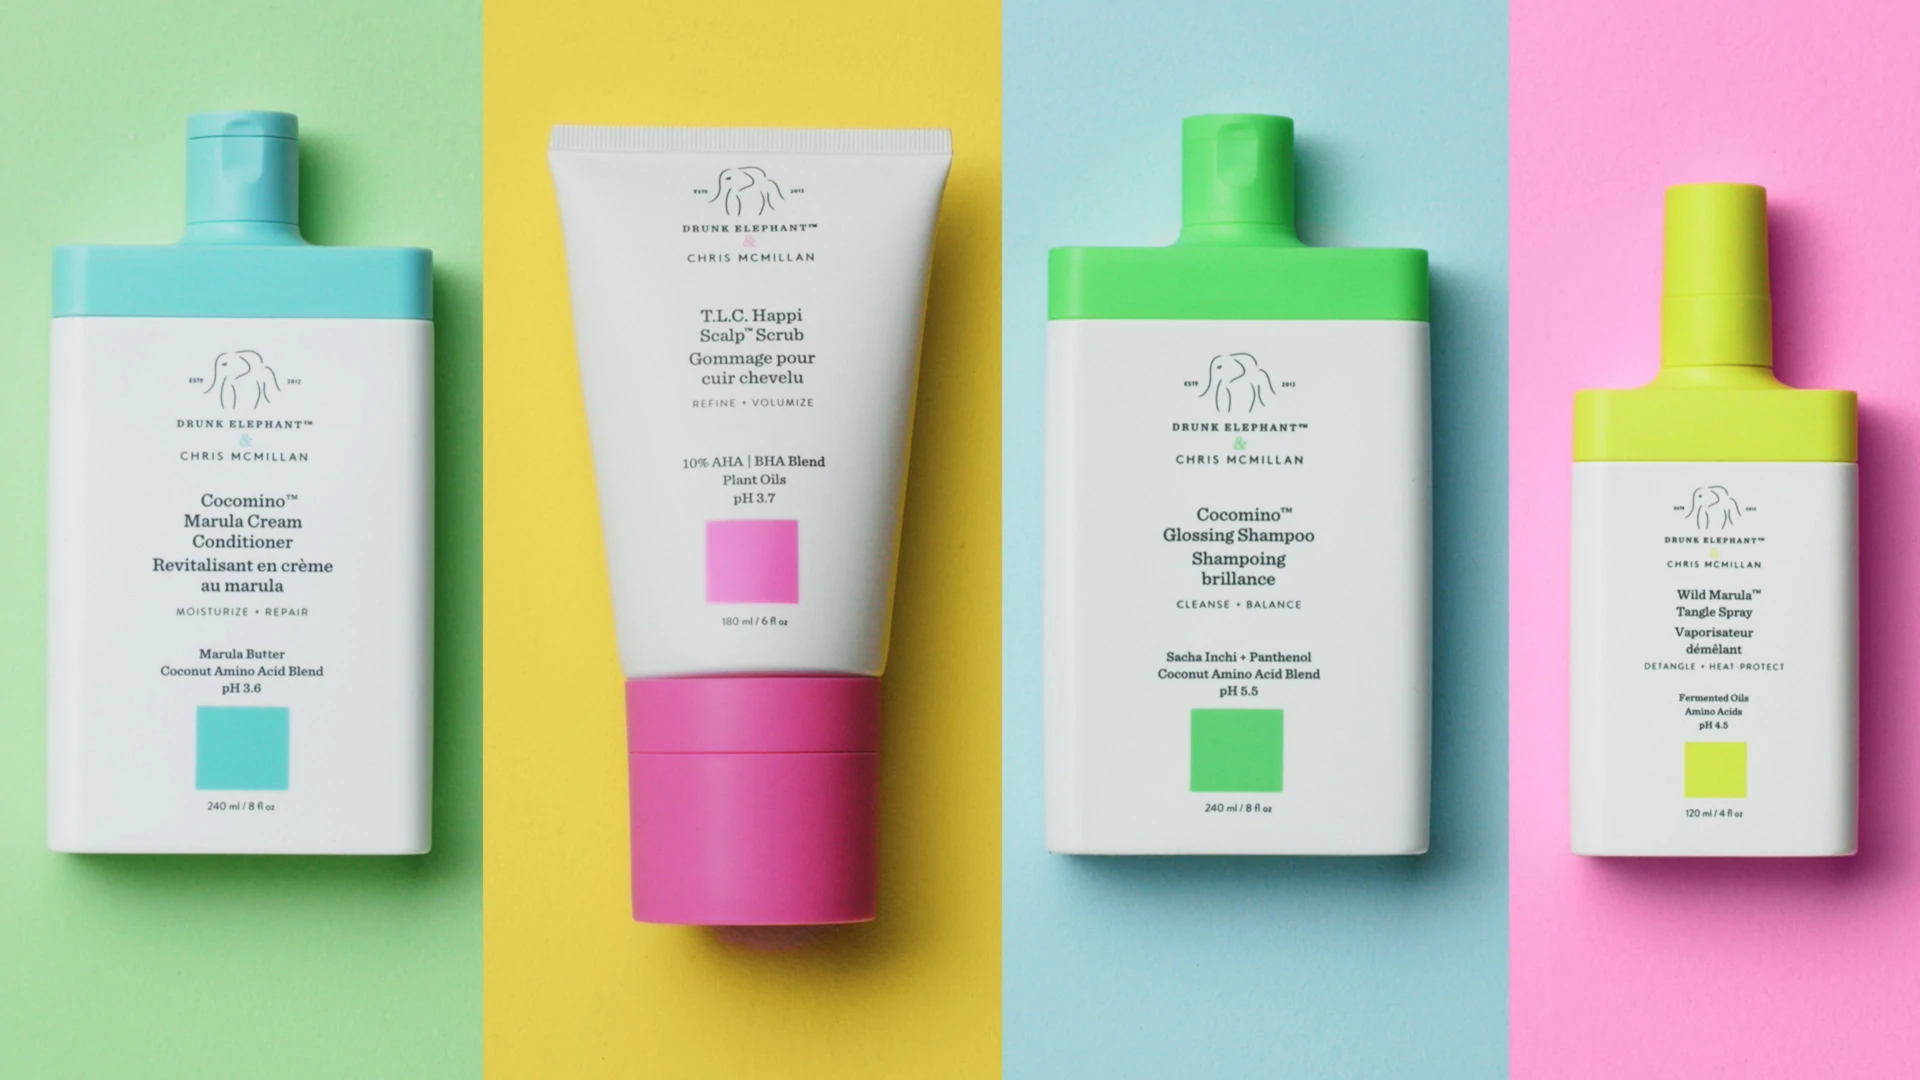 image showing conditioner, scalp scrub, shampoo, and marula tangle spray products on a colorful background. Copy overlay: 